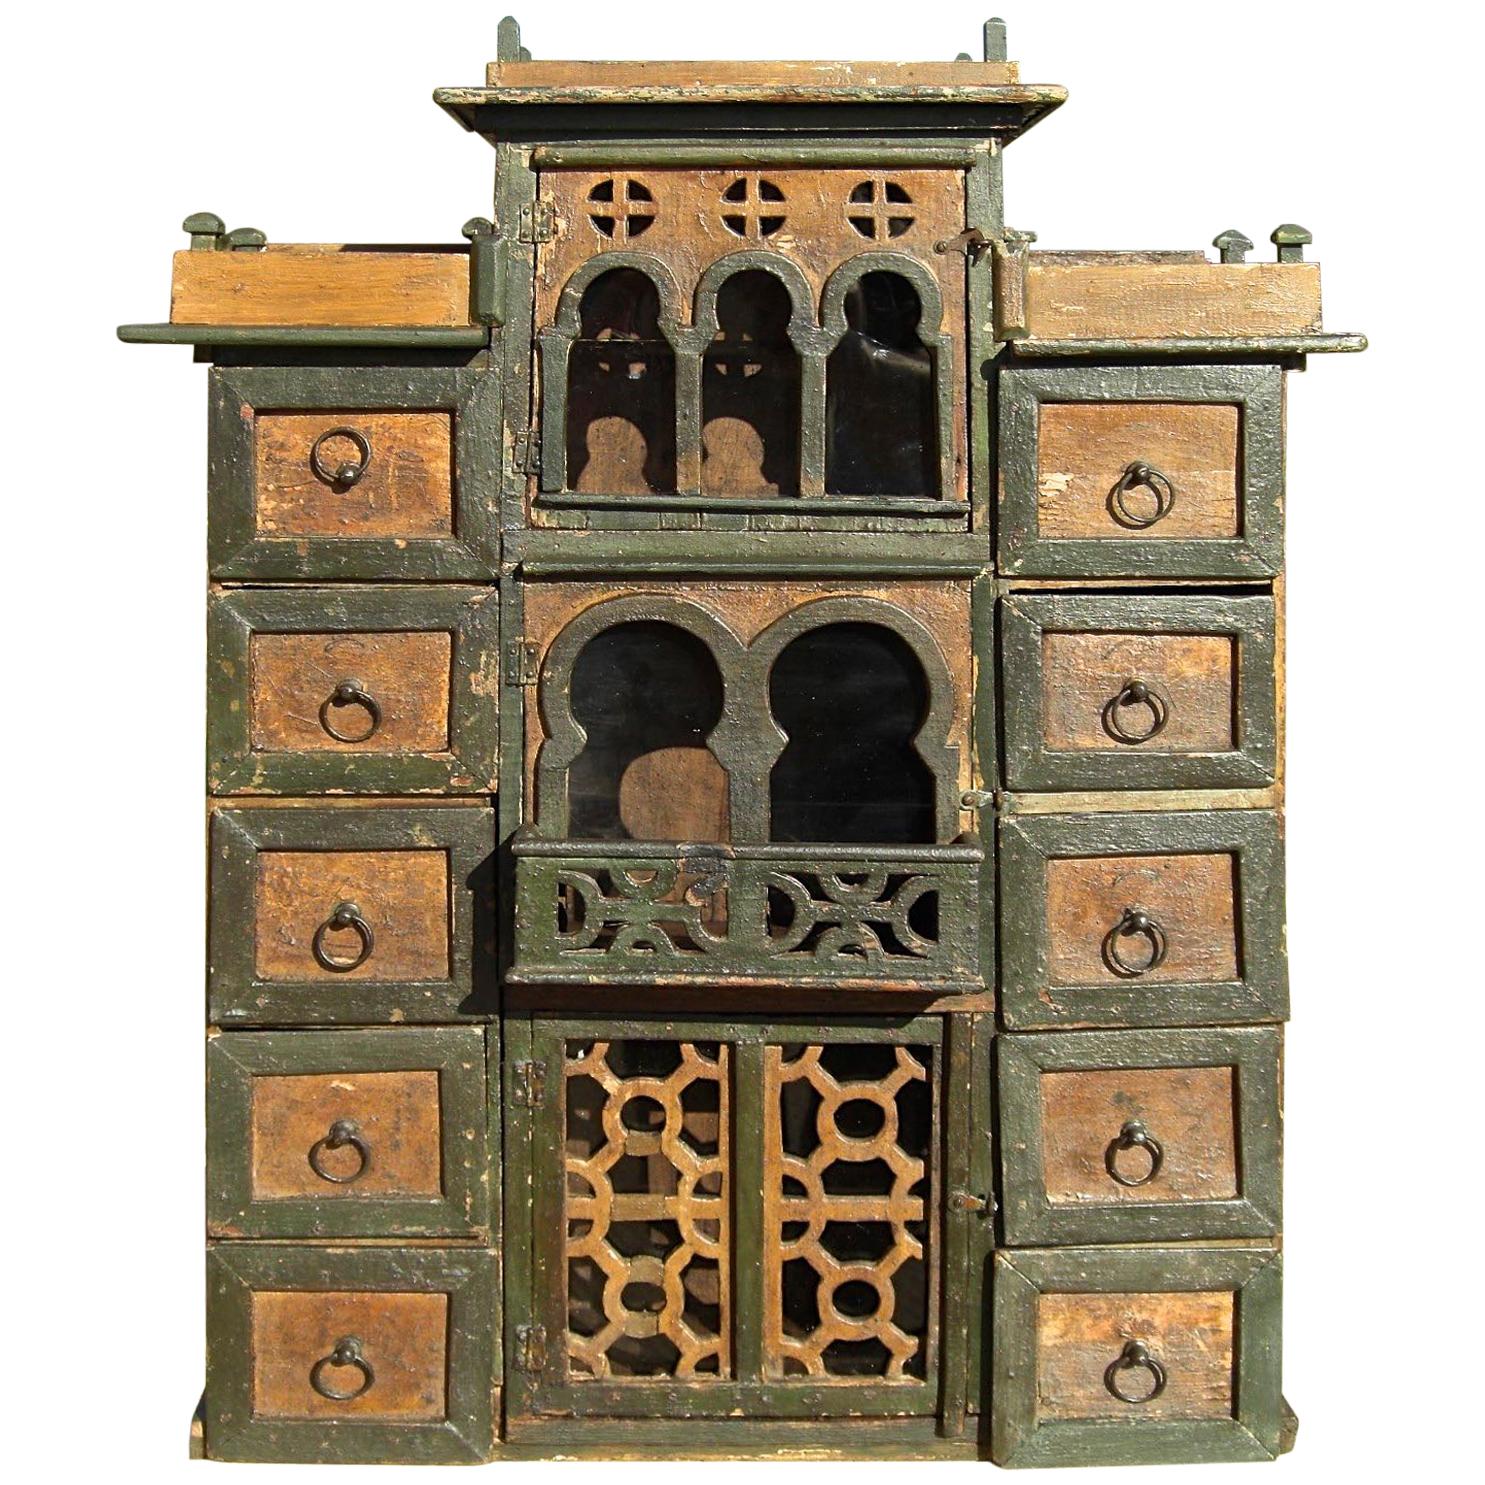 Late 19th Century Hanging Neo-Moorish Spice Cabinet from Andalusia, Spain